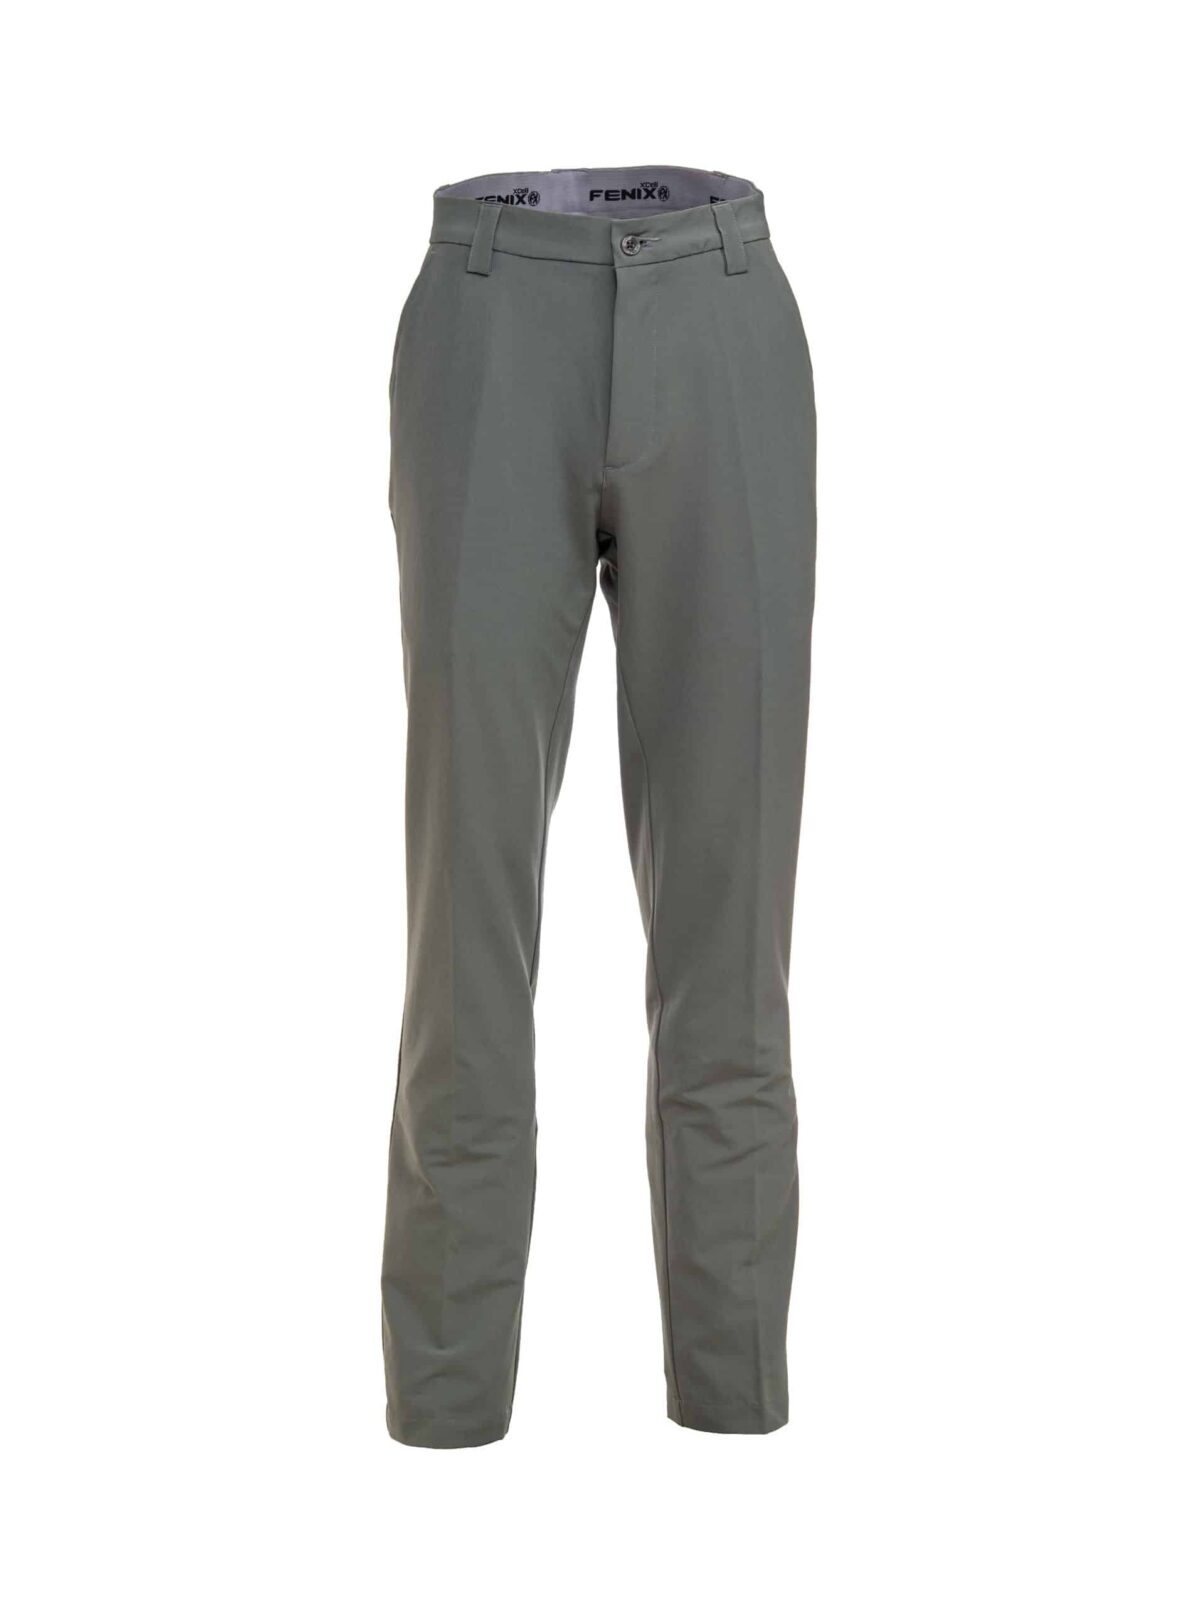 Fenix XCell Men's grey golf trousers front view